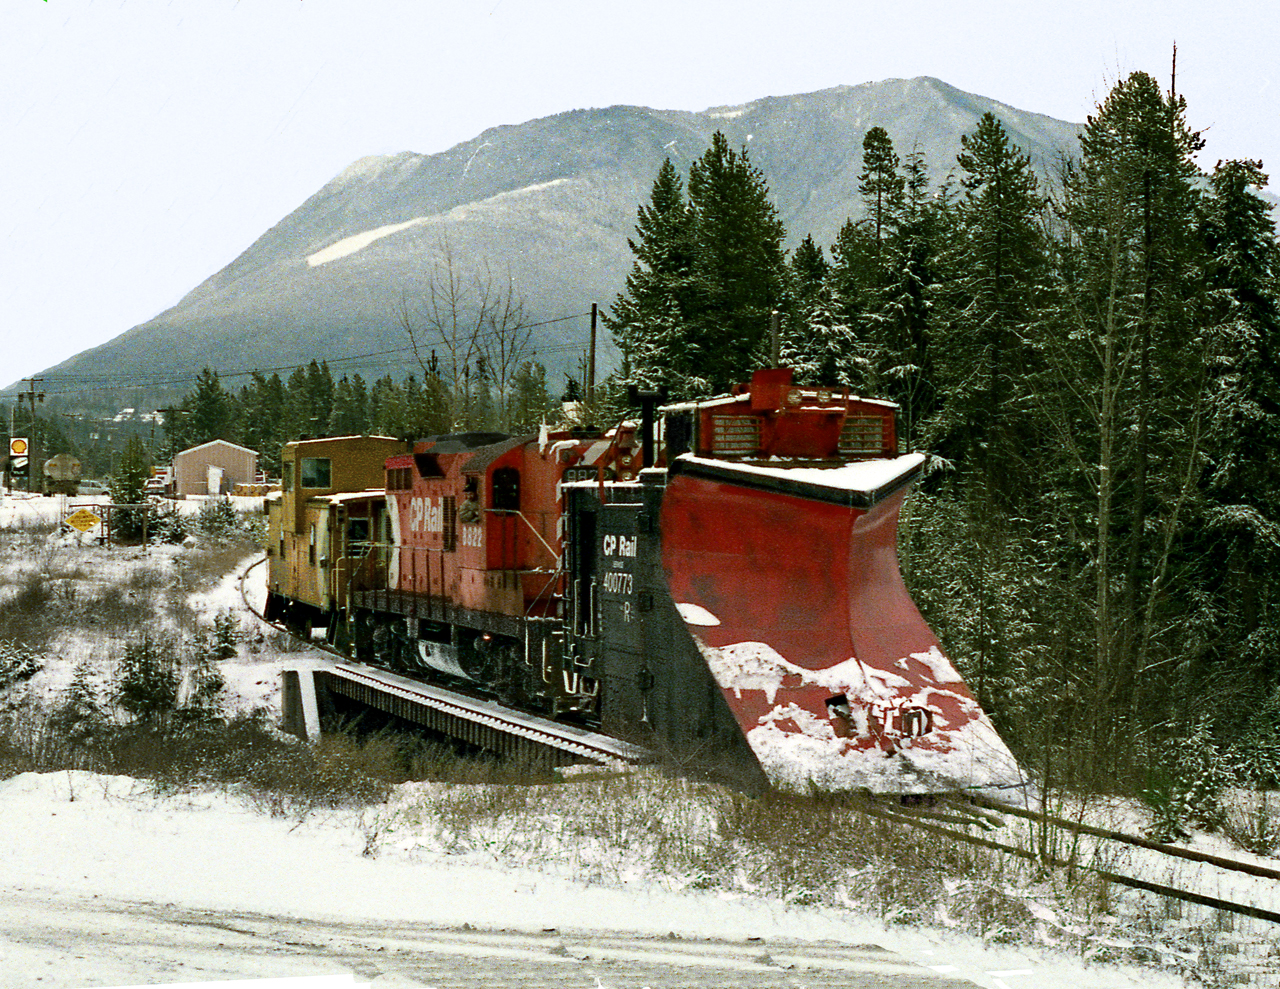 Prior to the last run on the isolated Kaslo Subdivision, only accessed by car barge on Slocan Lake, the crew rounds up M of W equipment stored at Nakusp. The train crosses Kuskanook River headed to the wye where snow plow will be put in trailing position for trip to Rosebery